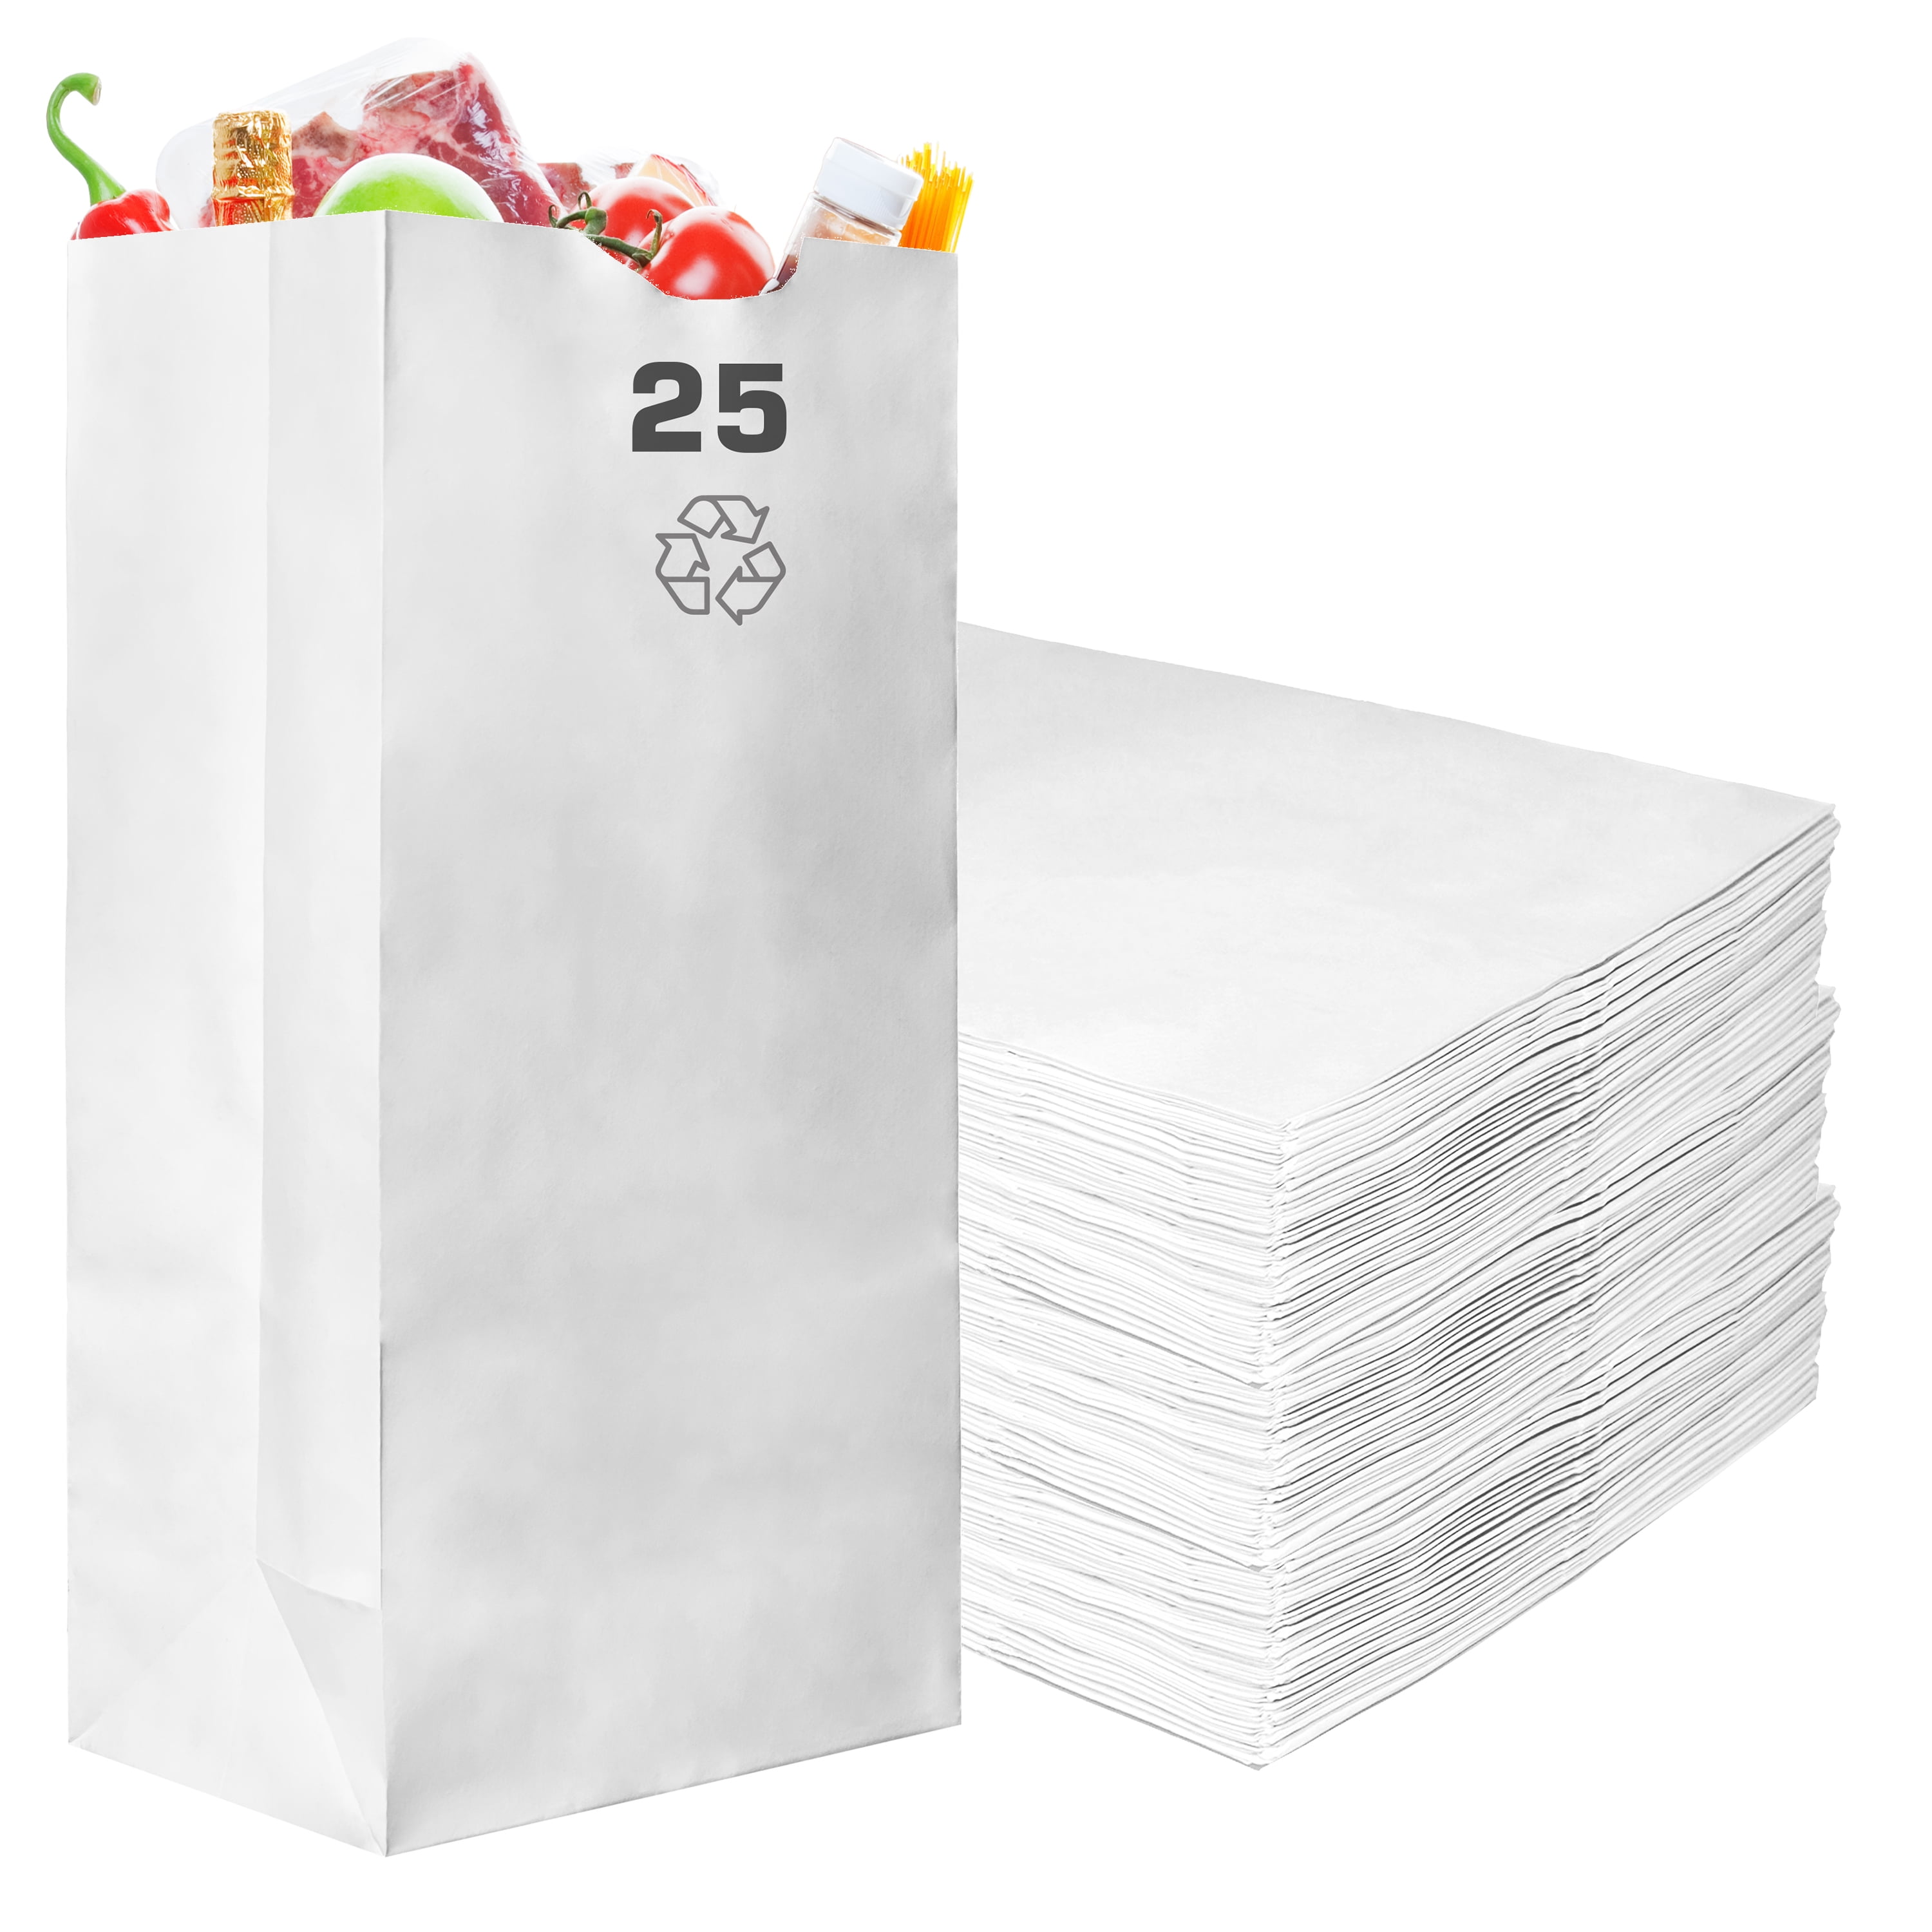 Concession Essentials 4lb White Paper Bags - Pack of 150ct. White Paper Lunch Bags. Great for Holiday Cookie Bags and Arts and Crafts, (